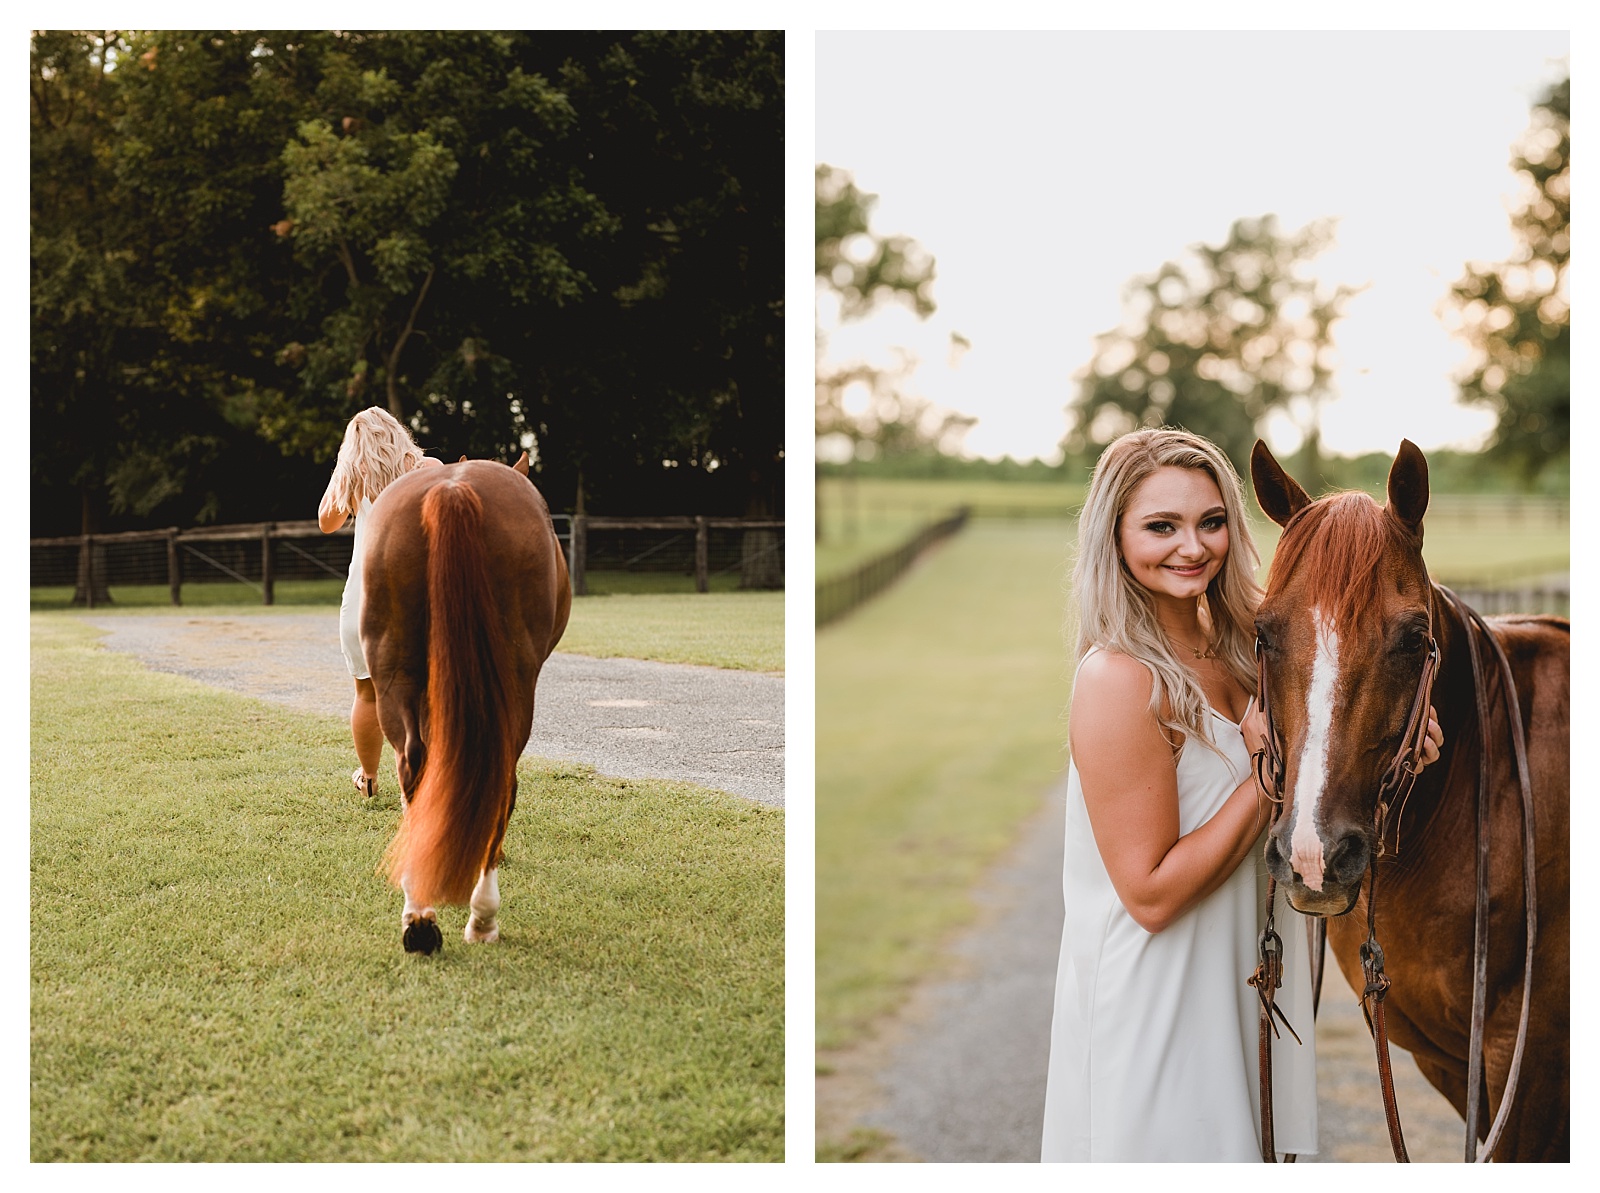 Equine portrait session in North Florida. Professional photography by Shelly Williams 